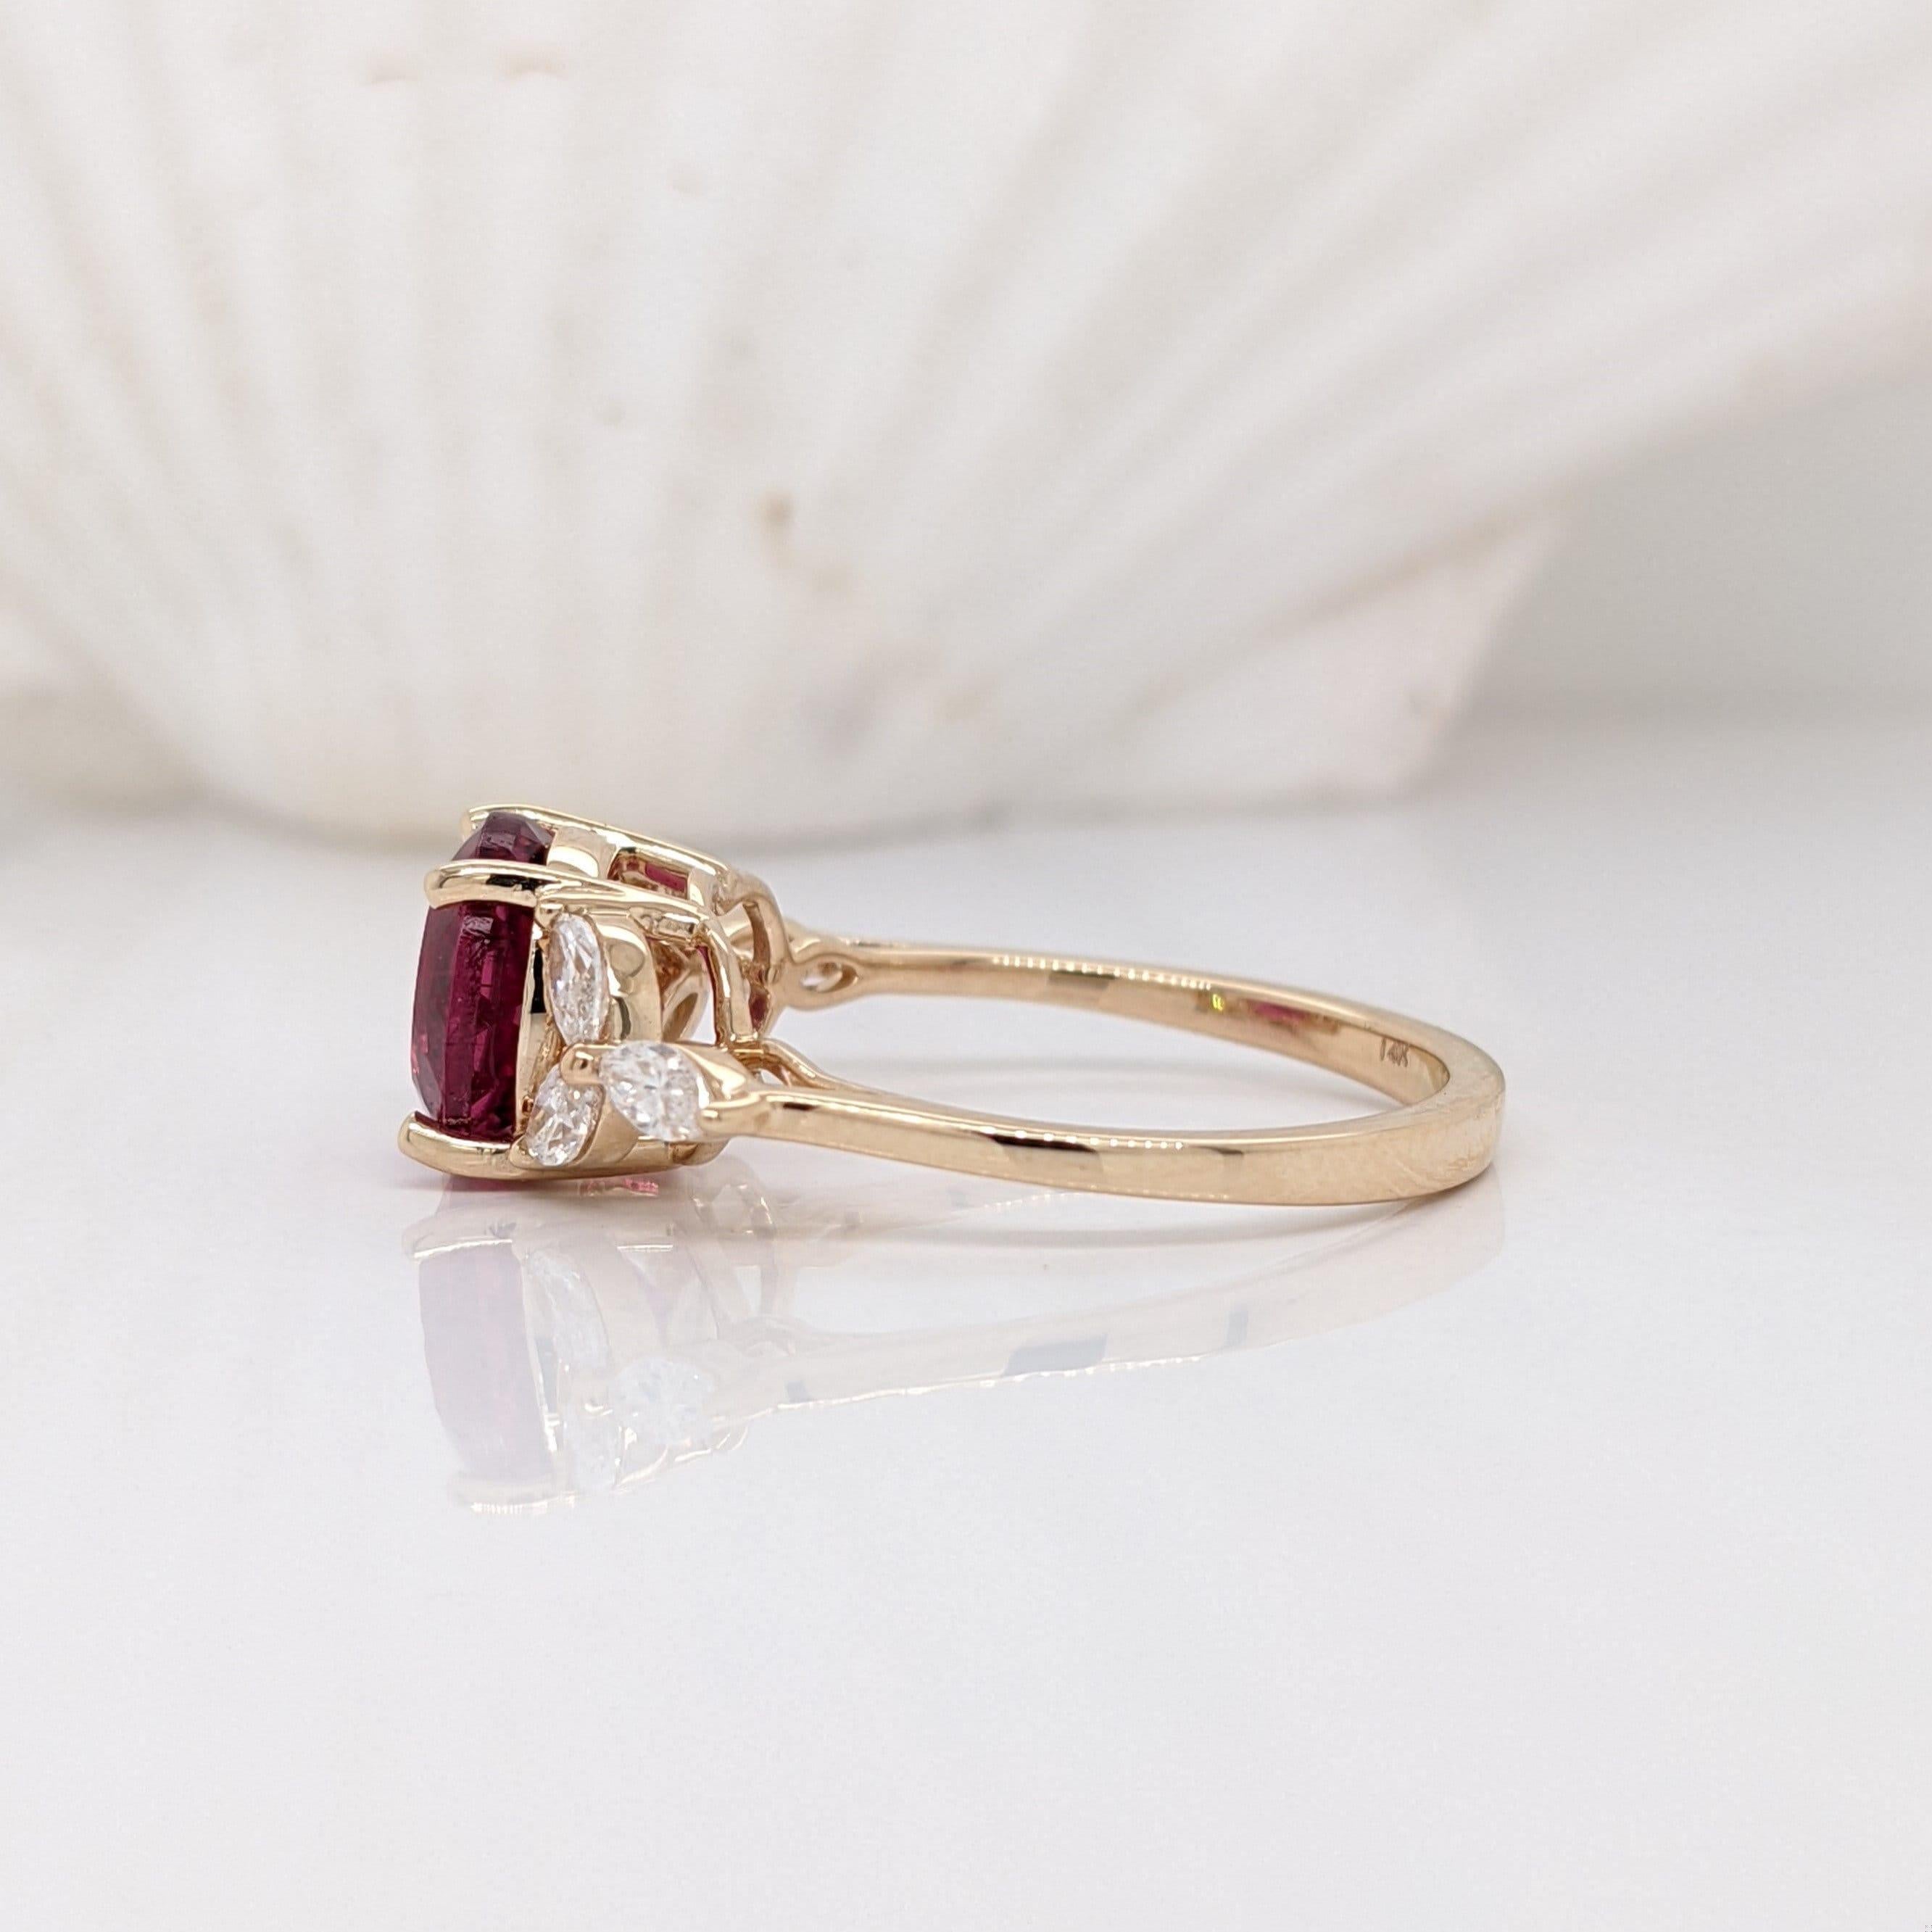 Modern 2ct Rubellite Tourmaline Ring w Earth Mined Diamonds in Solid 14k Gold Round 8mm For Sale